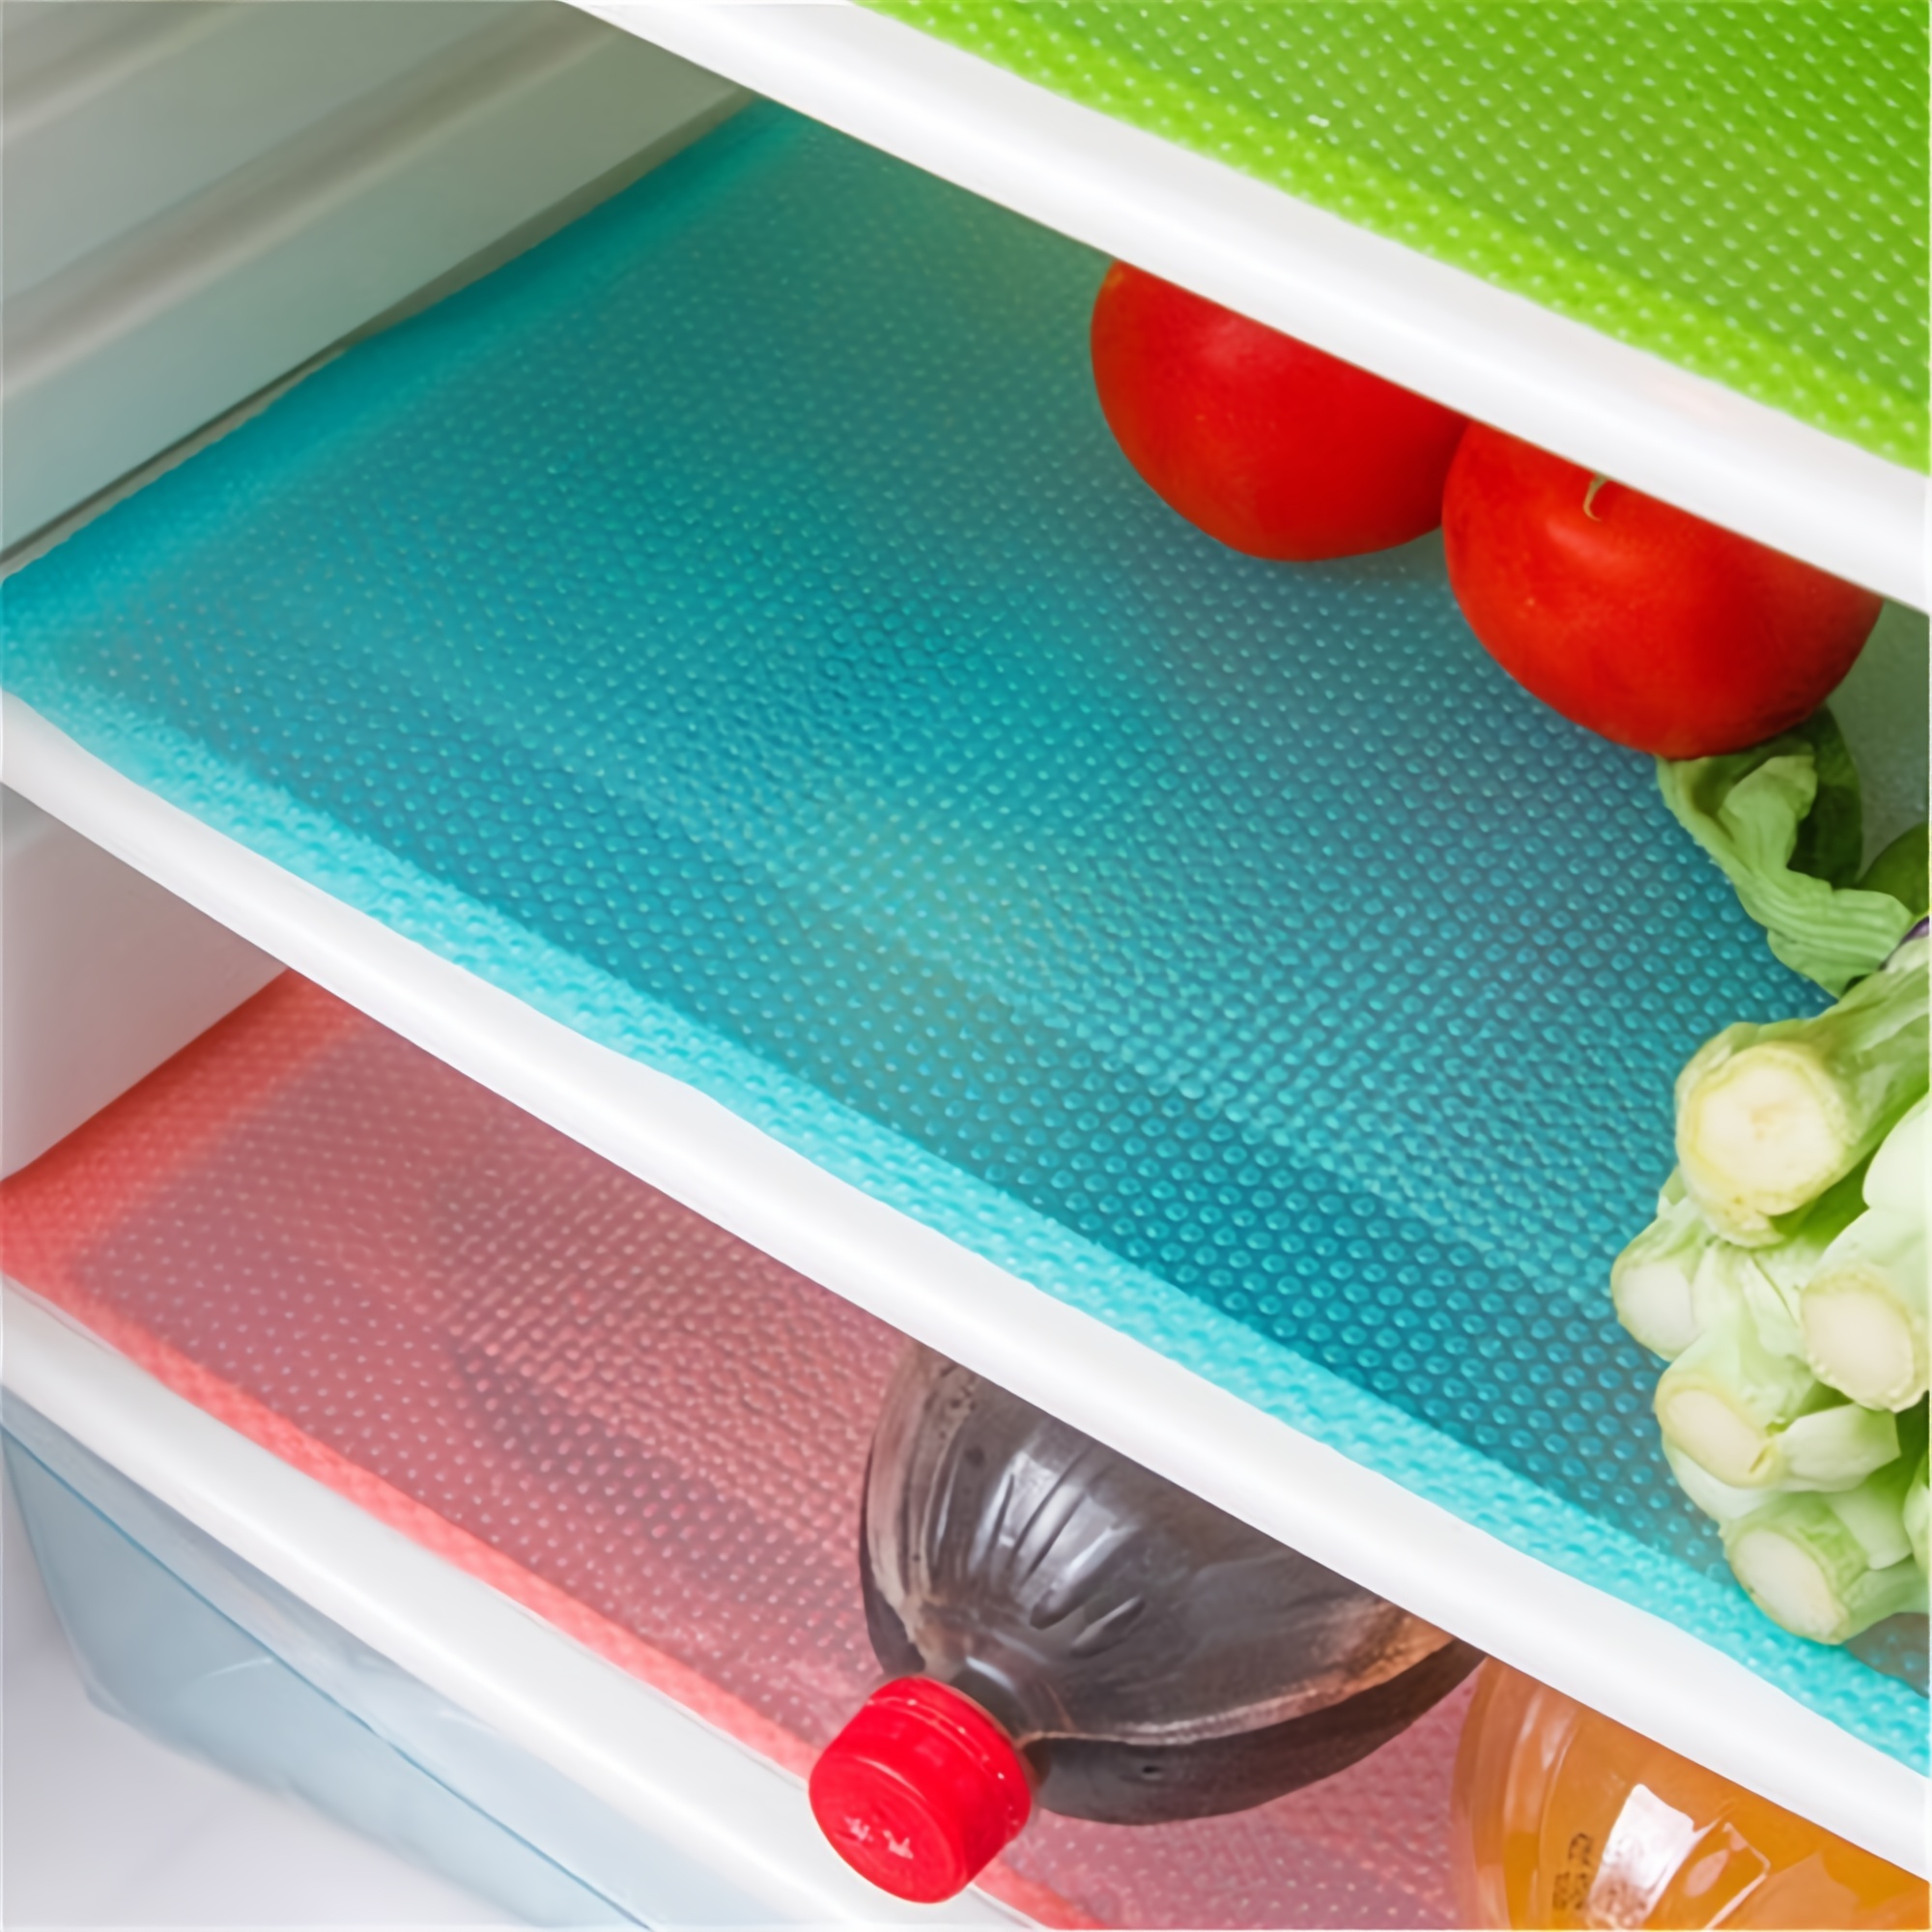 Smooth Drawer and Shelf Liners (2 Packs)